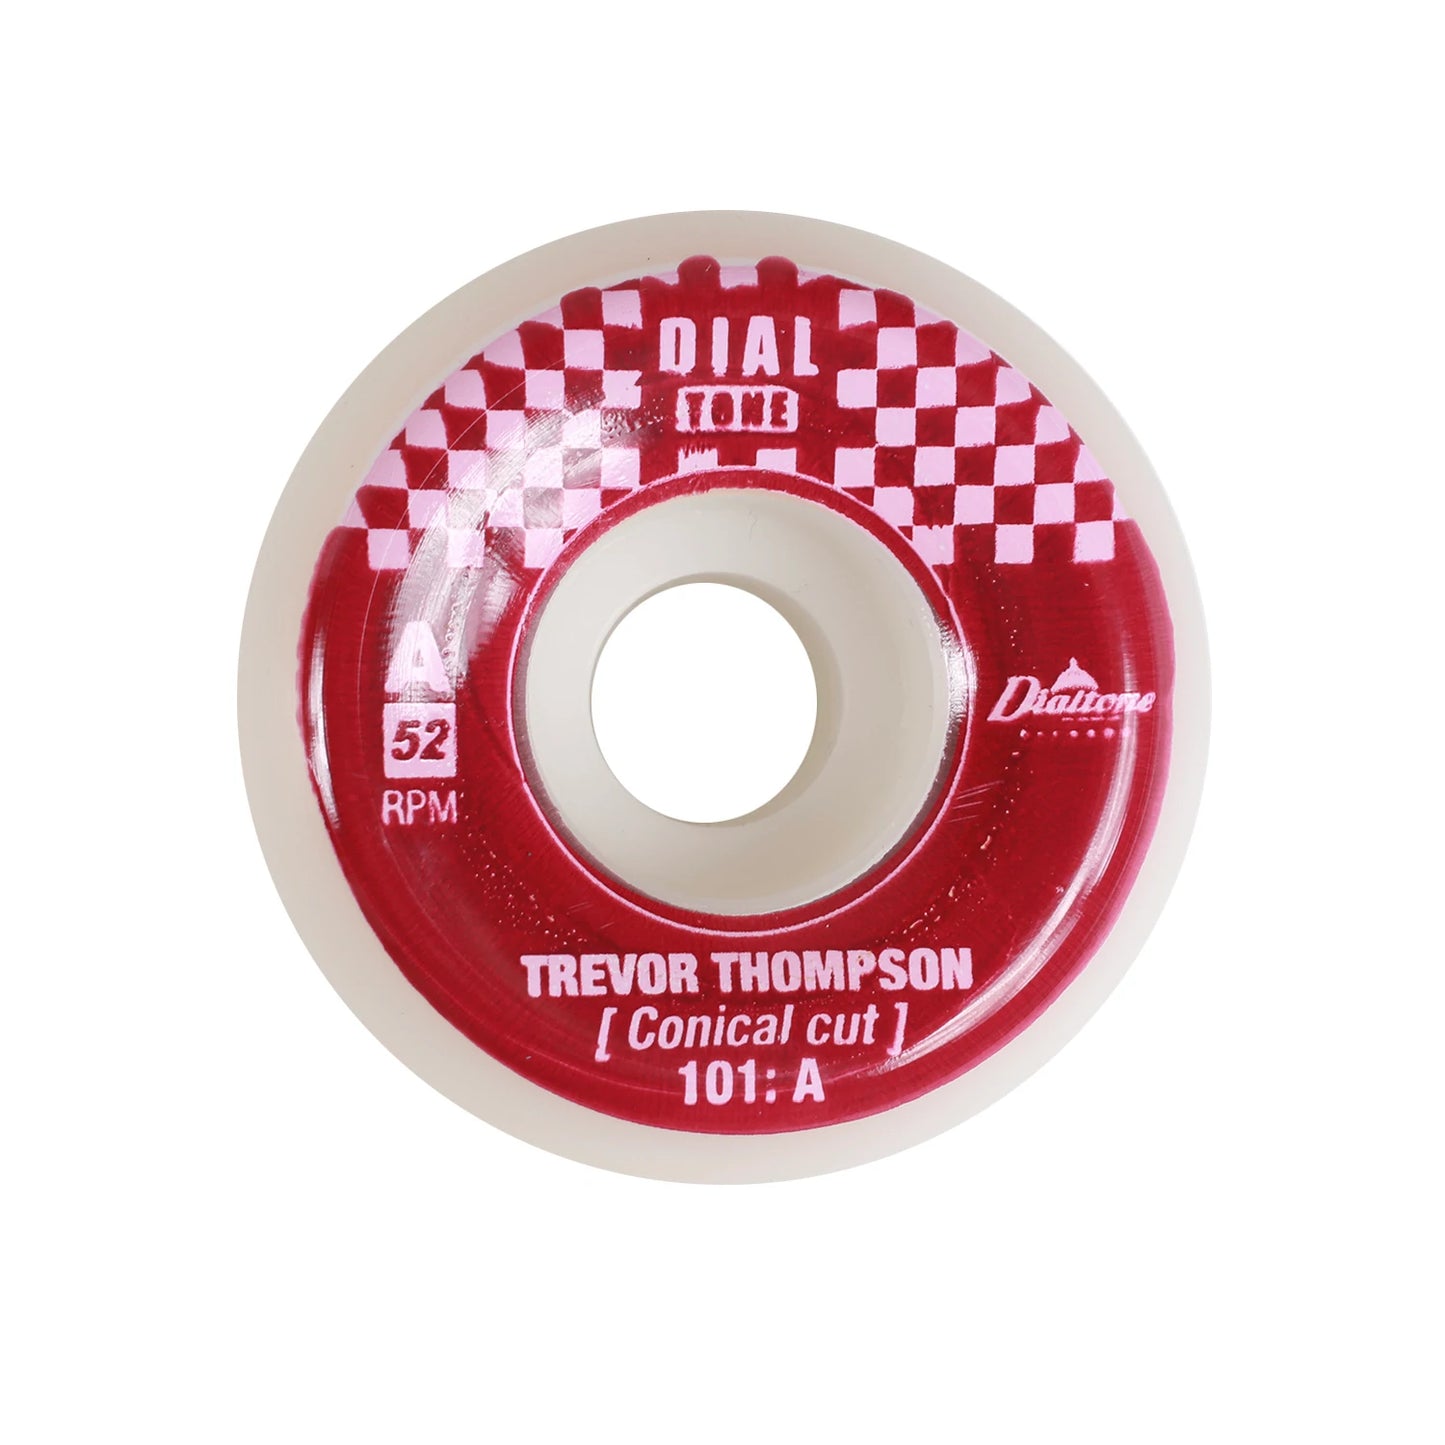 Dial Tone Thompson Capitol Conical 101a 52mm Wheels